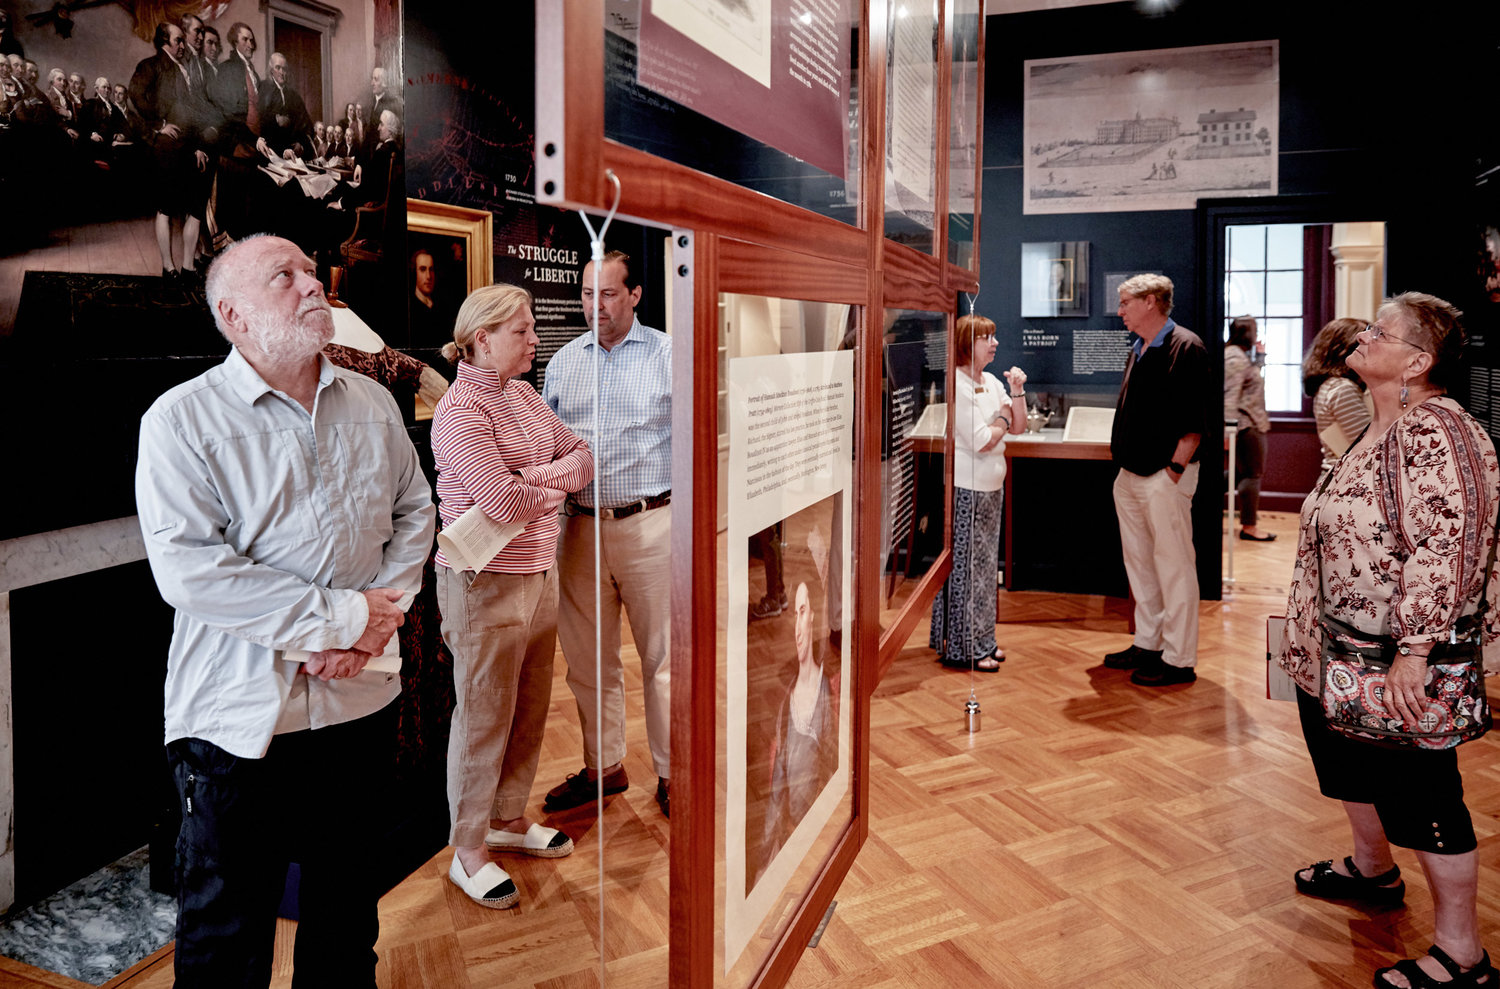 A group looking through an exhibit at morven museum